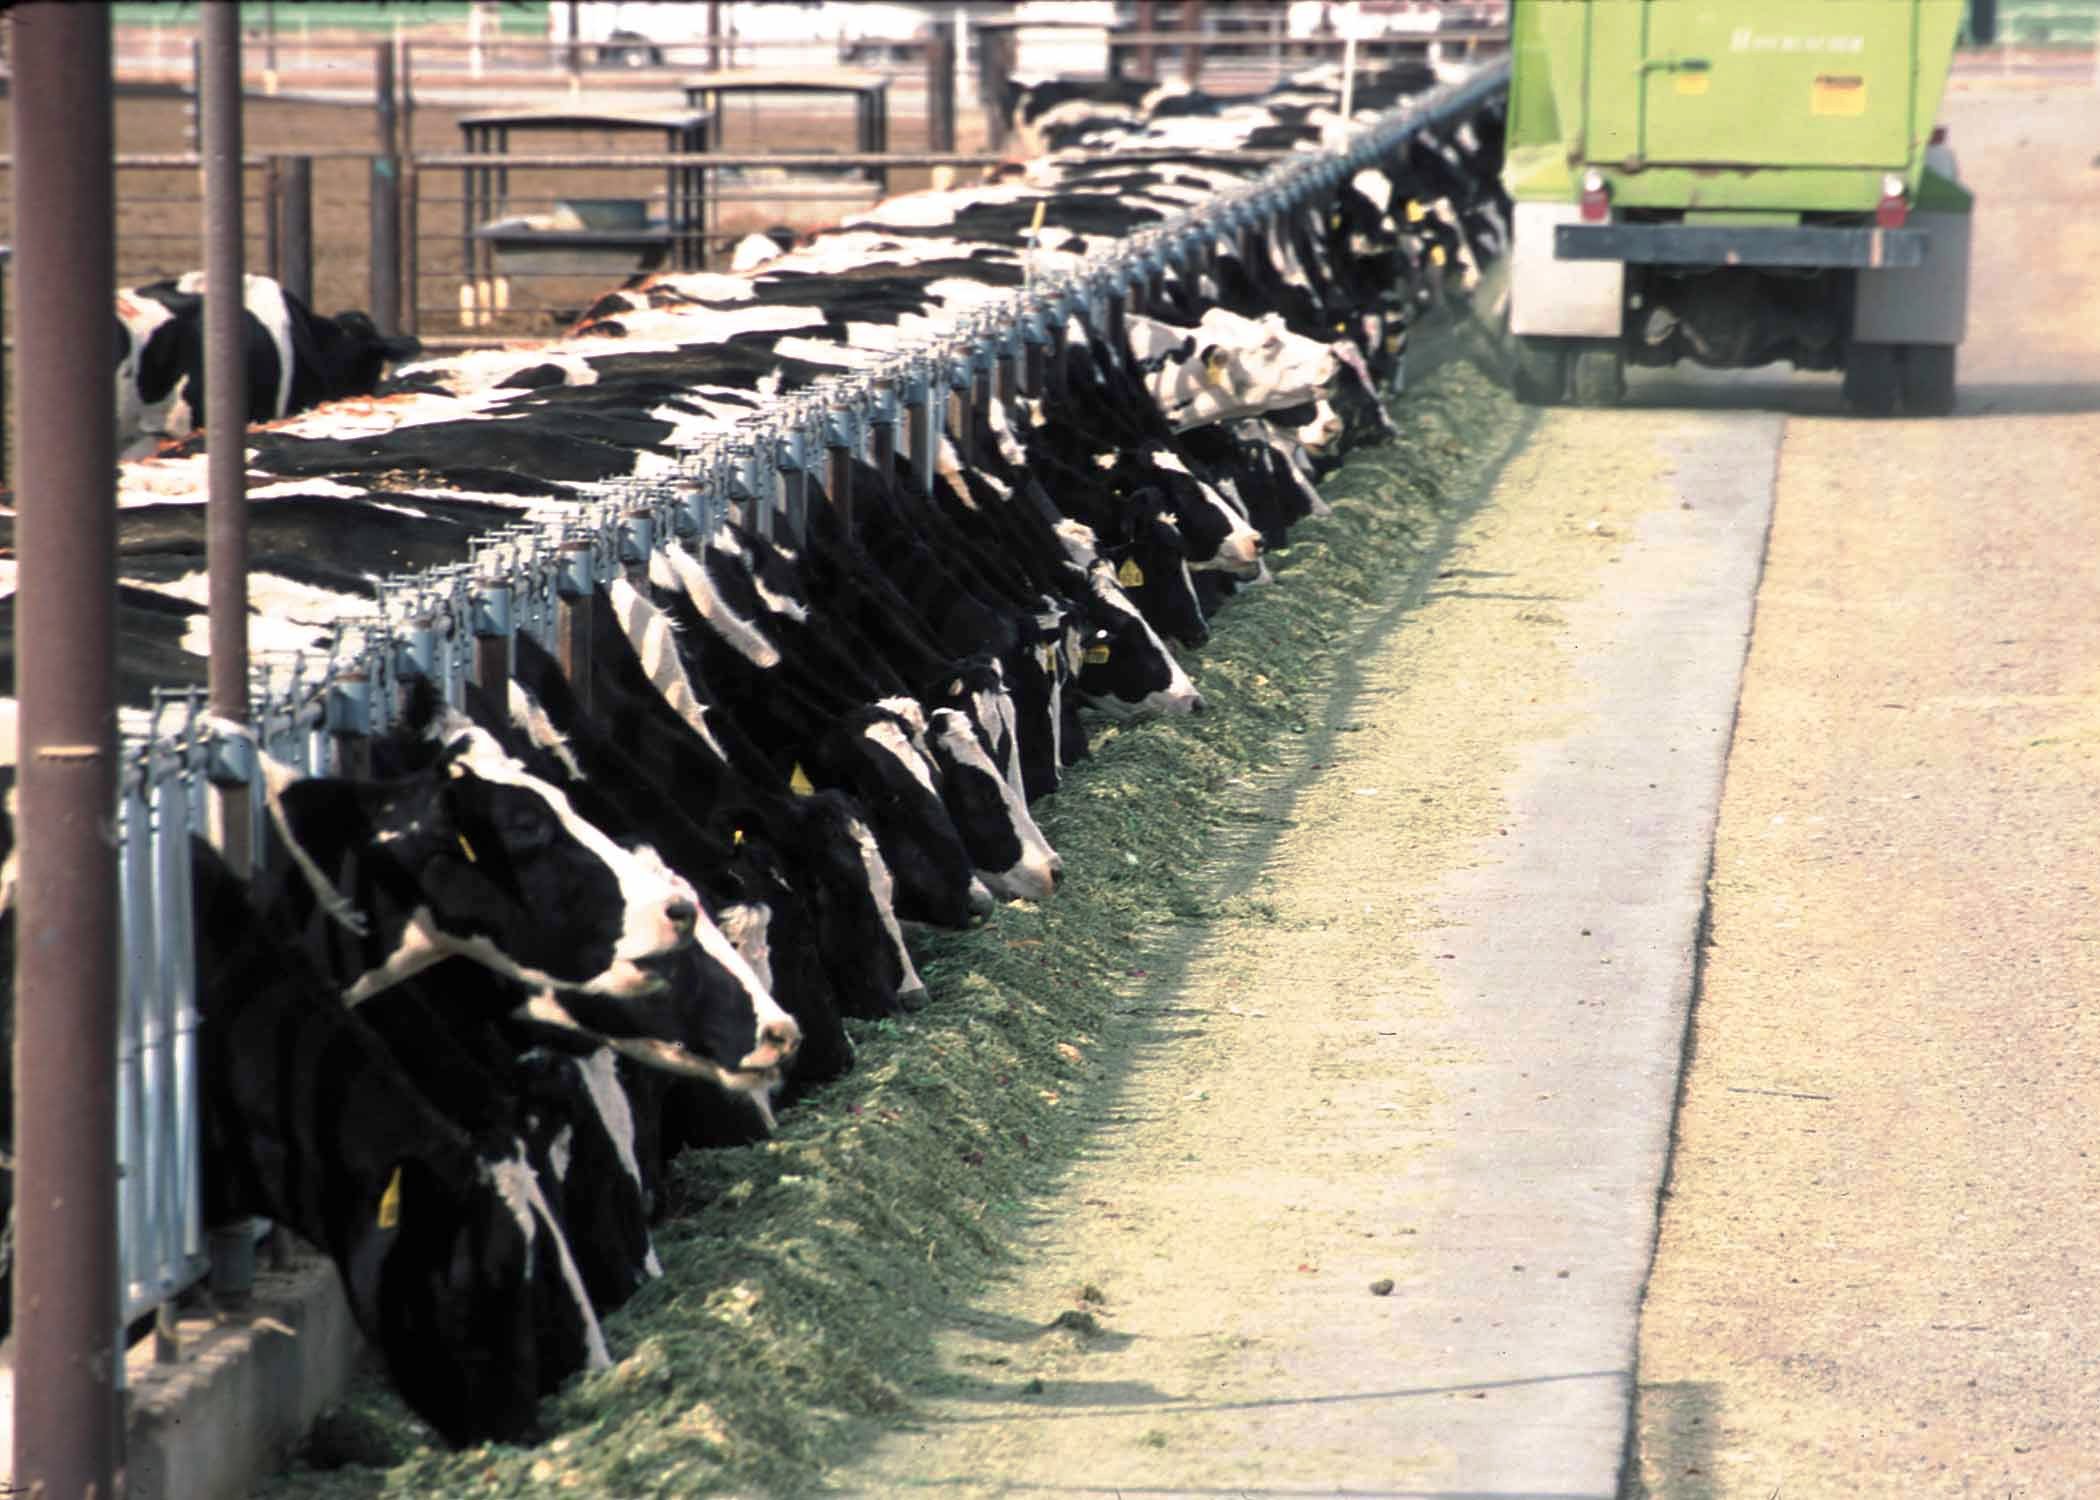 Black and white dairy cows in a row feeding from a trough